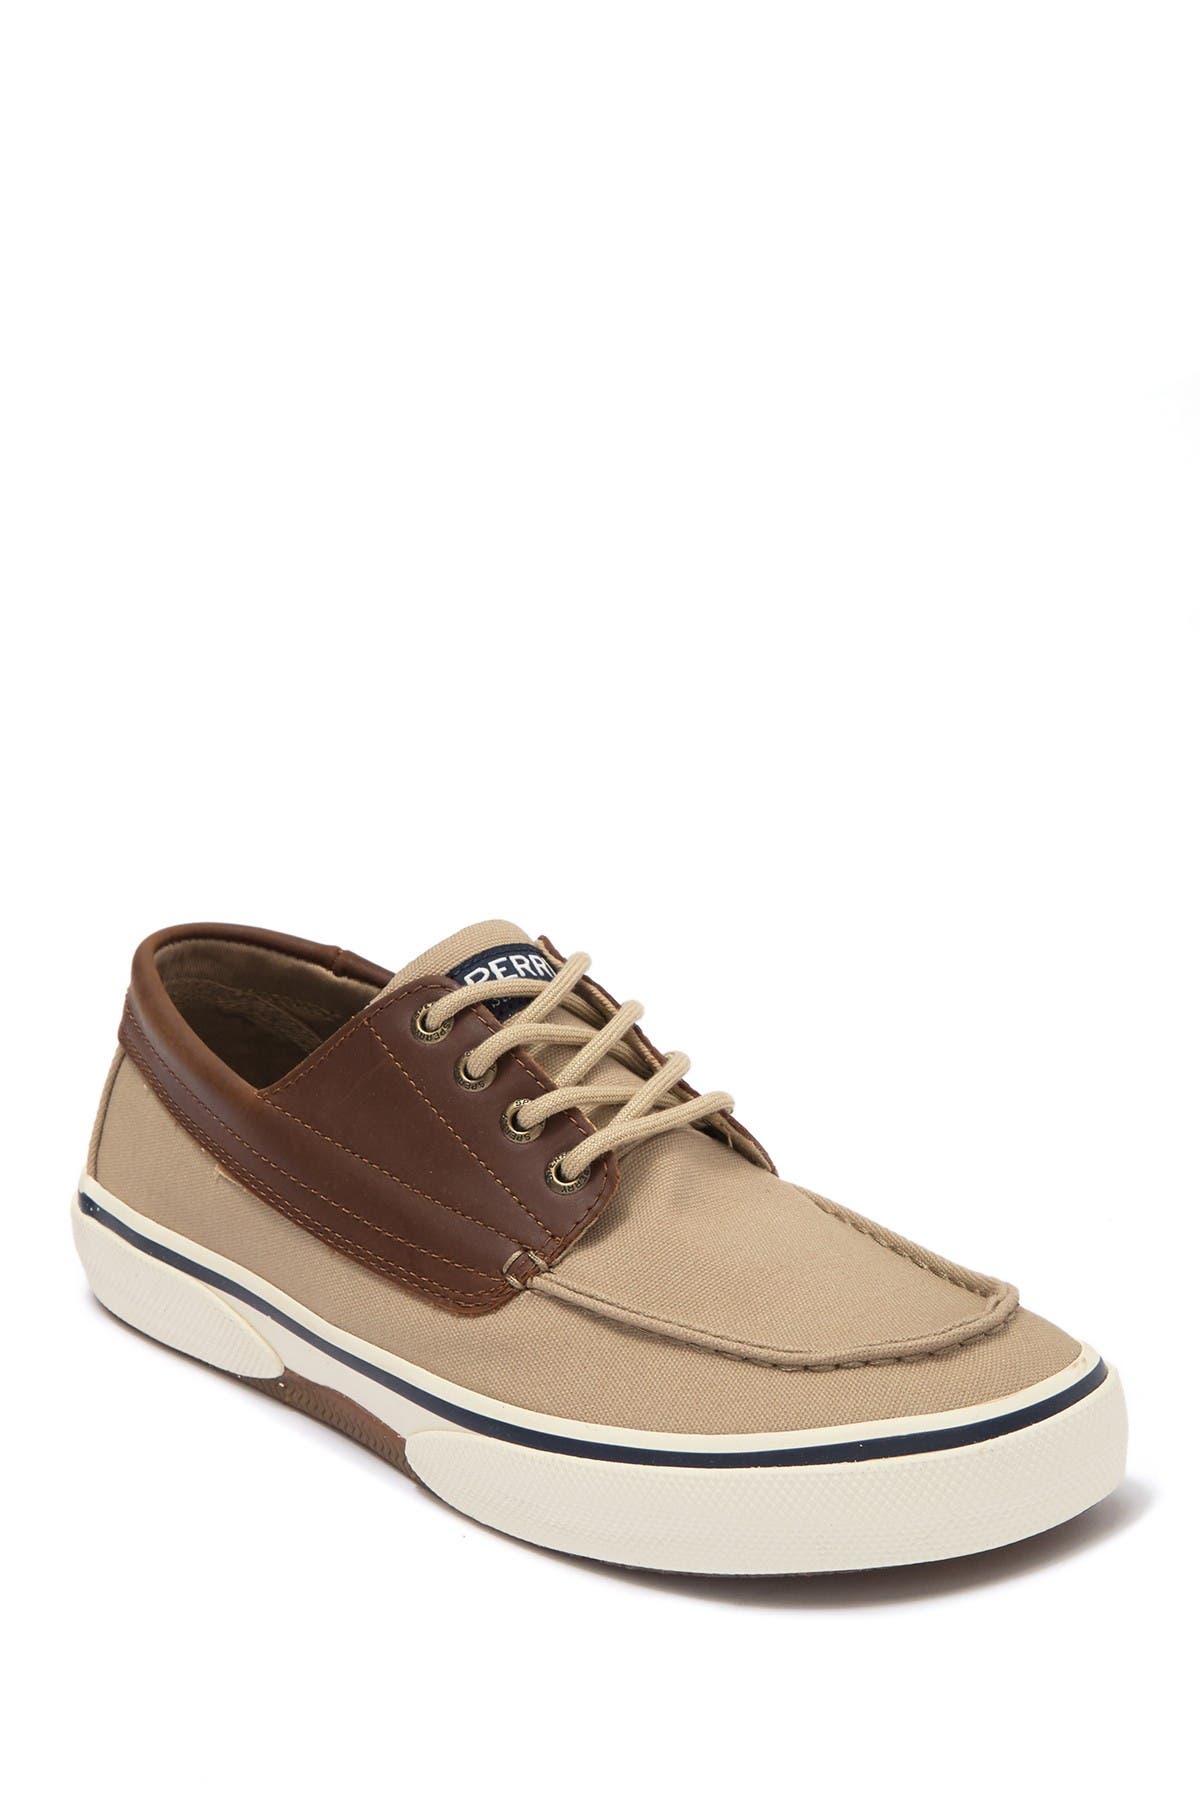 sperry camp moc